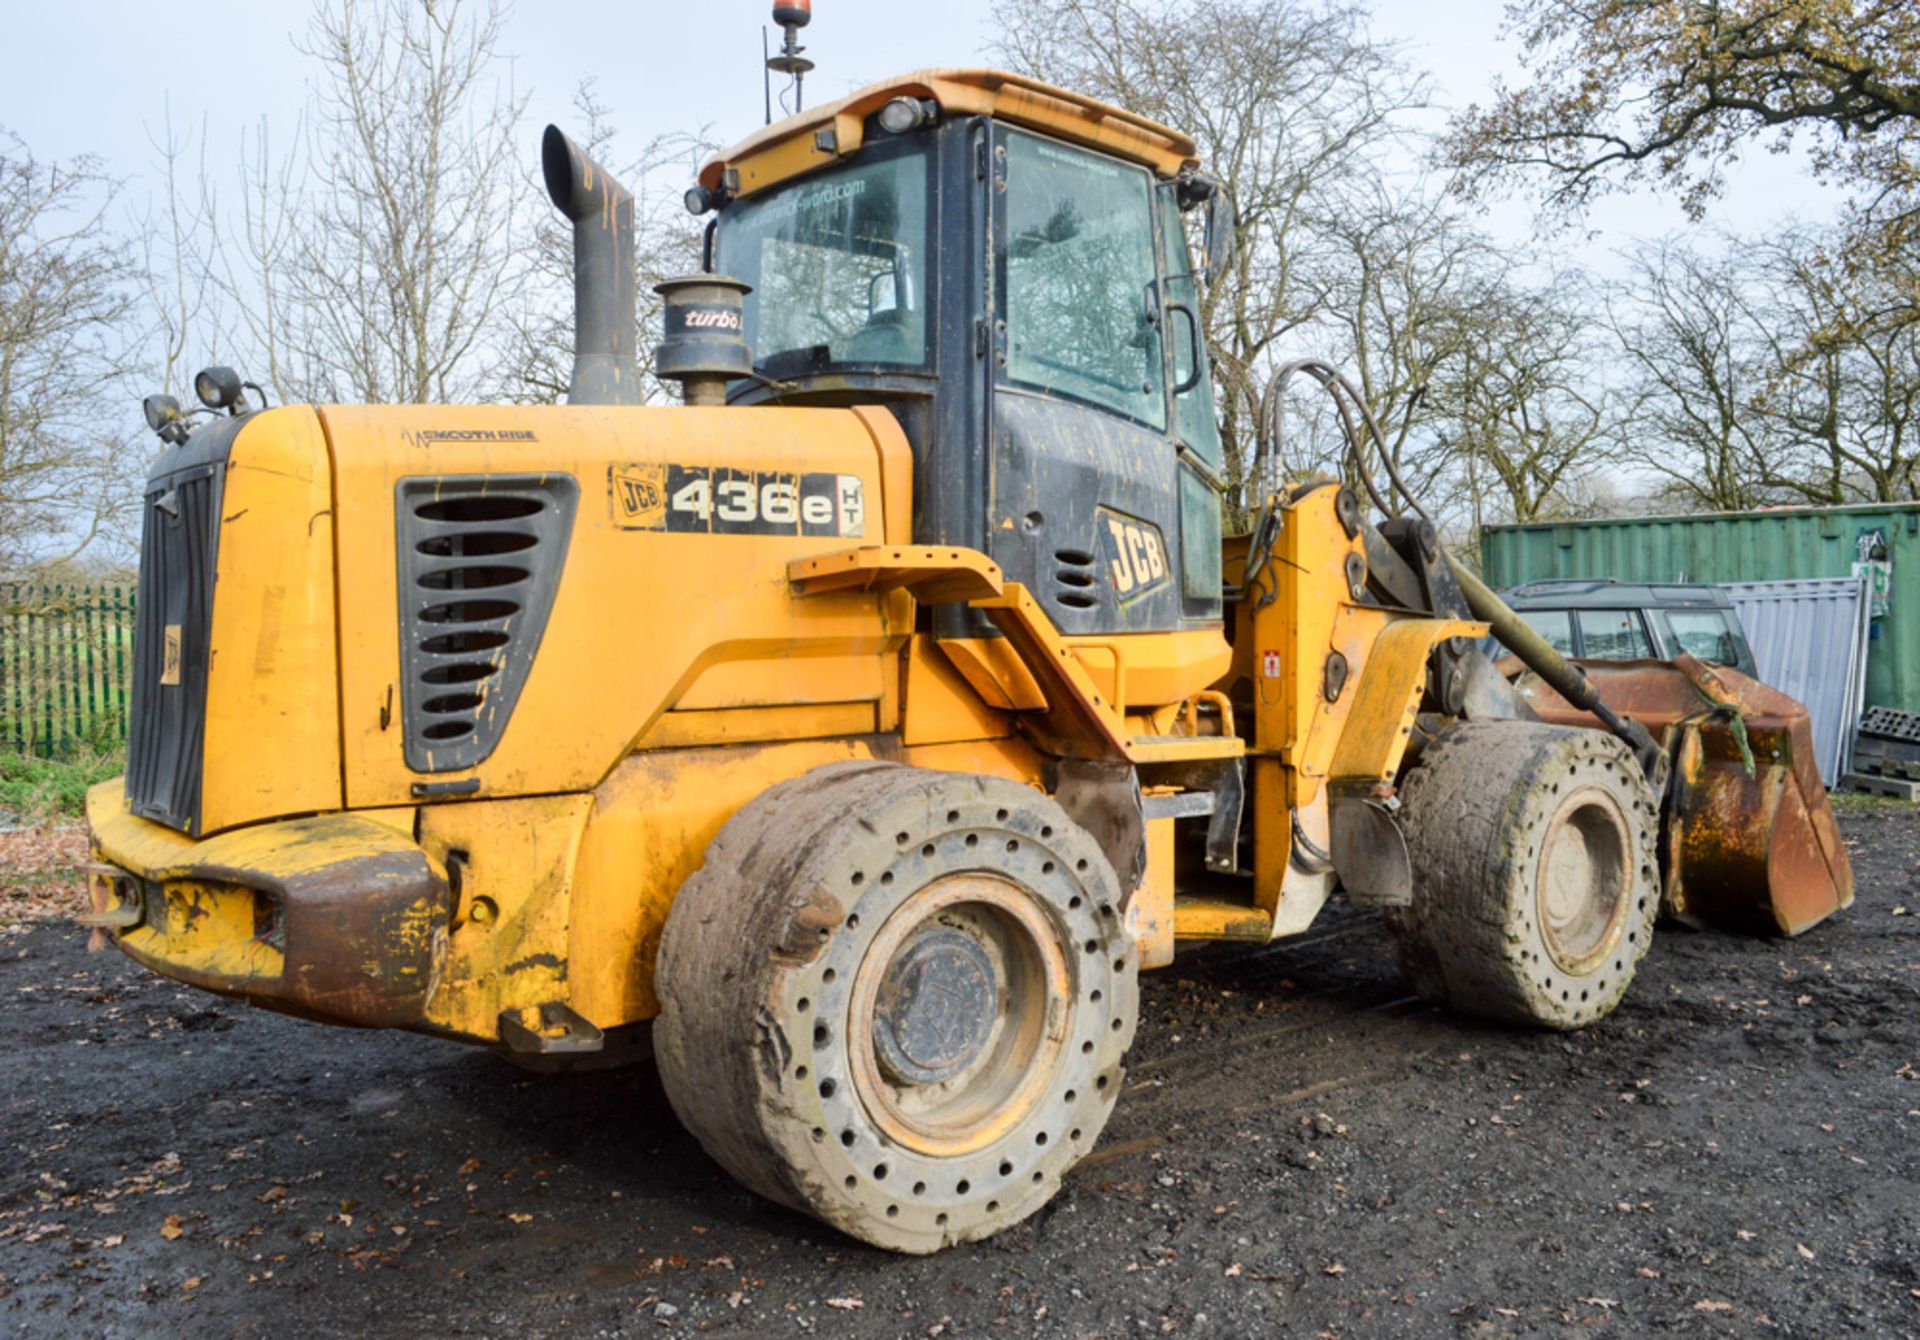 JCB 436E HT loading shovel Year: 2007 S/N: 1410067 Recorded Hours: 12,212 ** Sold as a non runner - Image 3 of 10